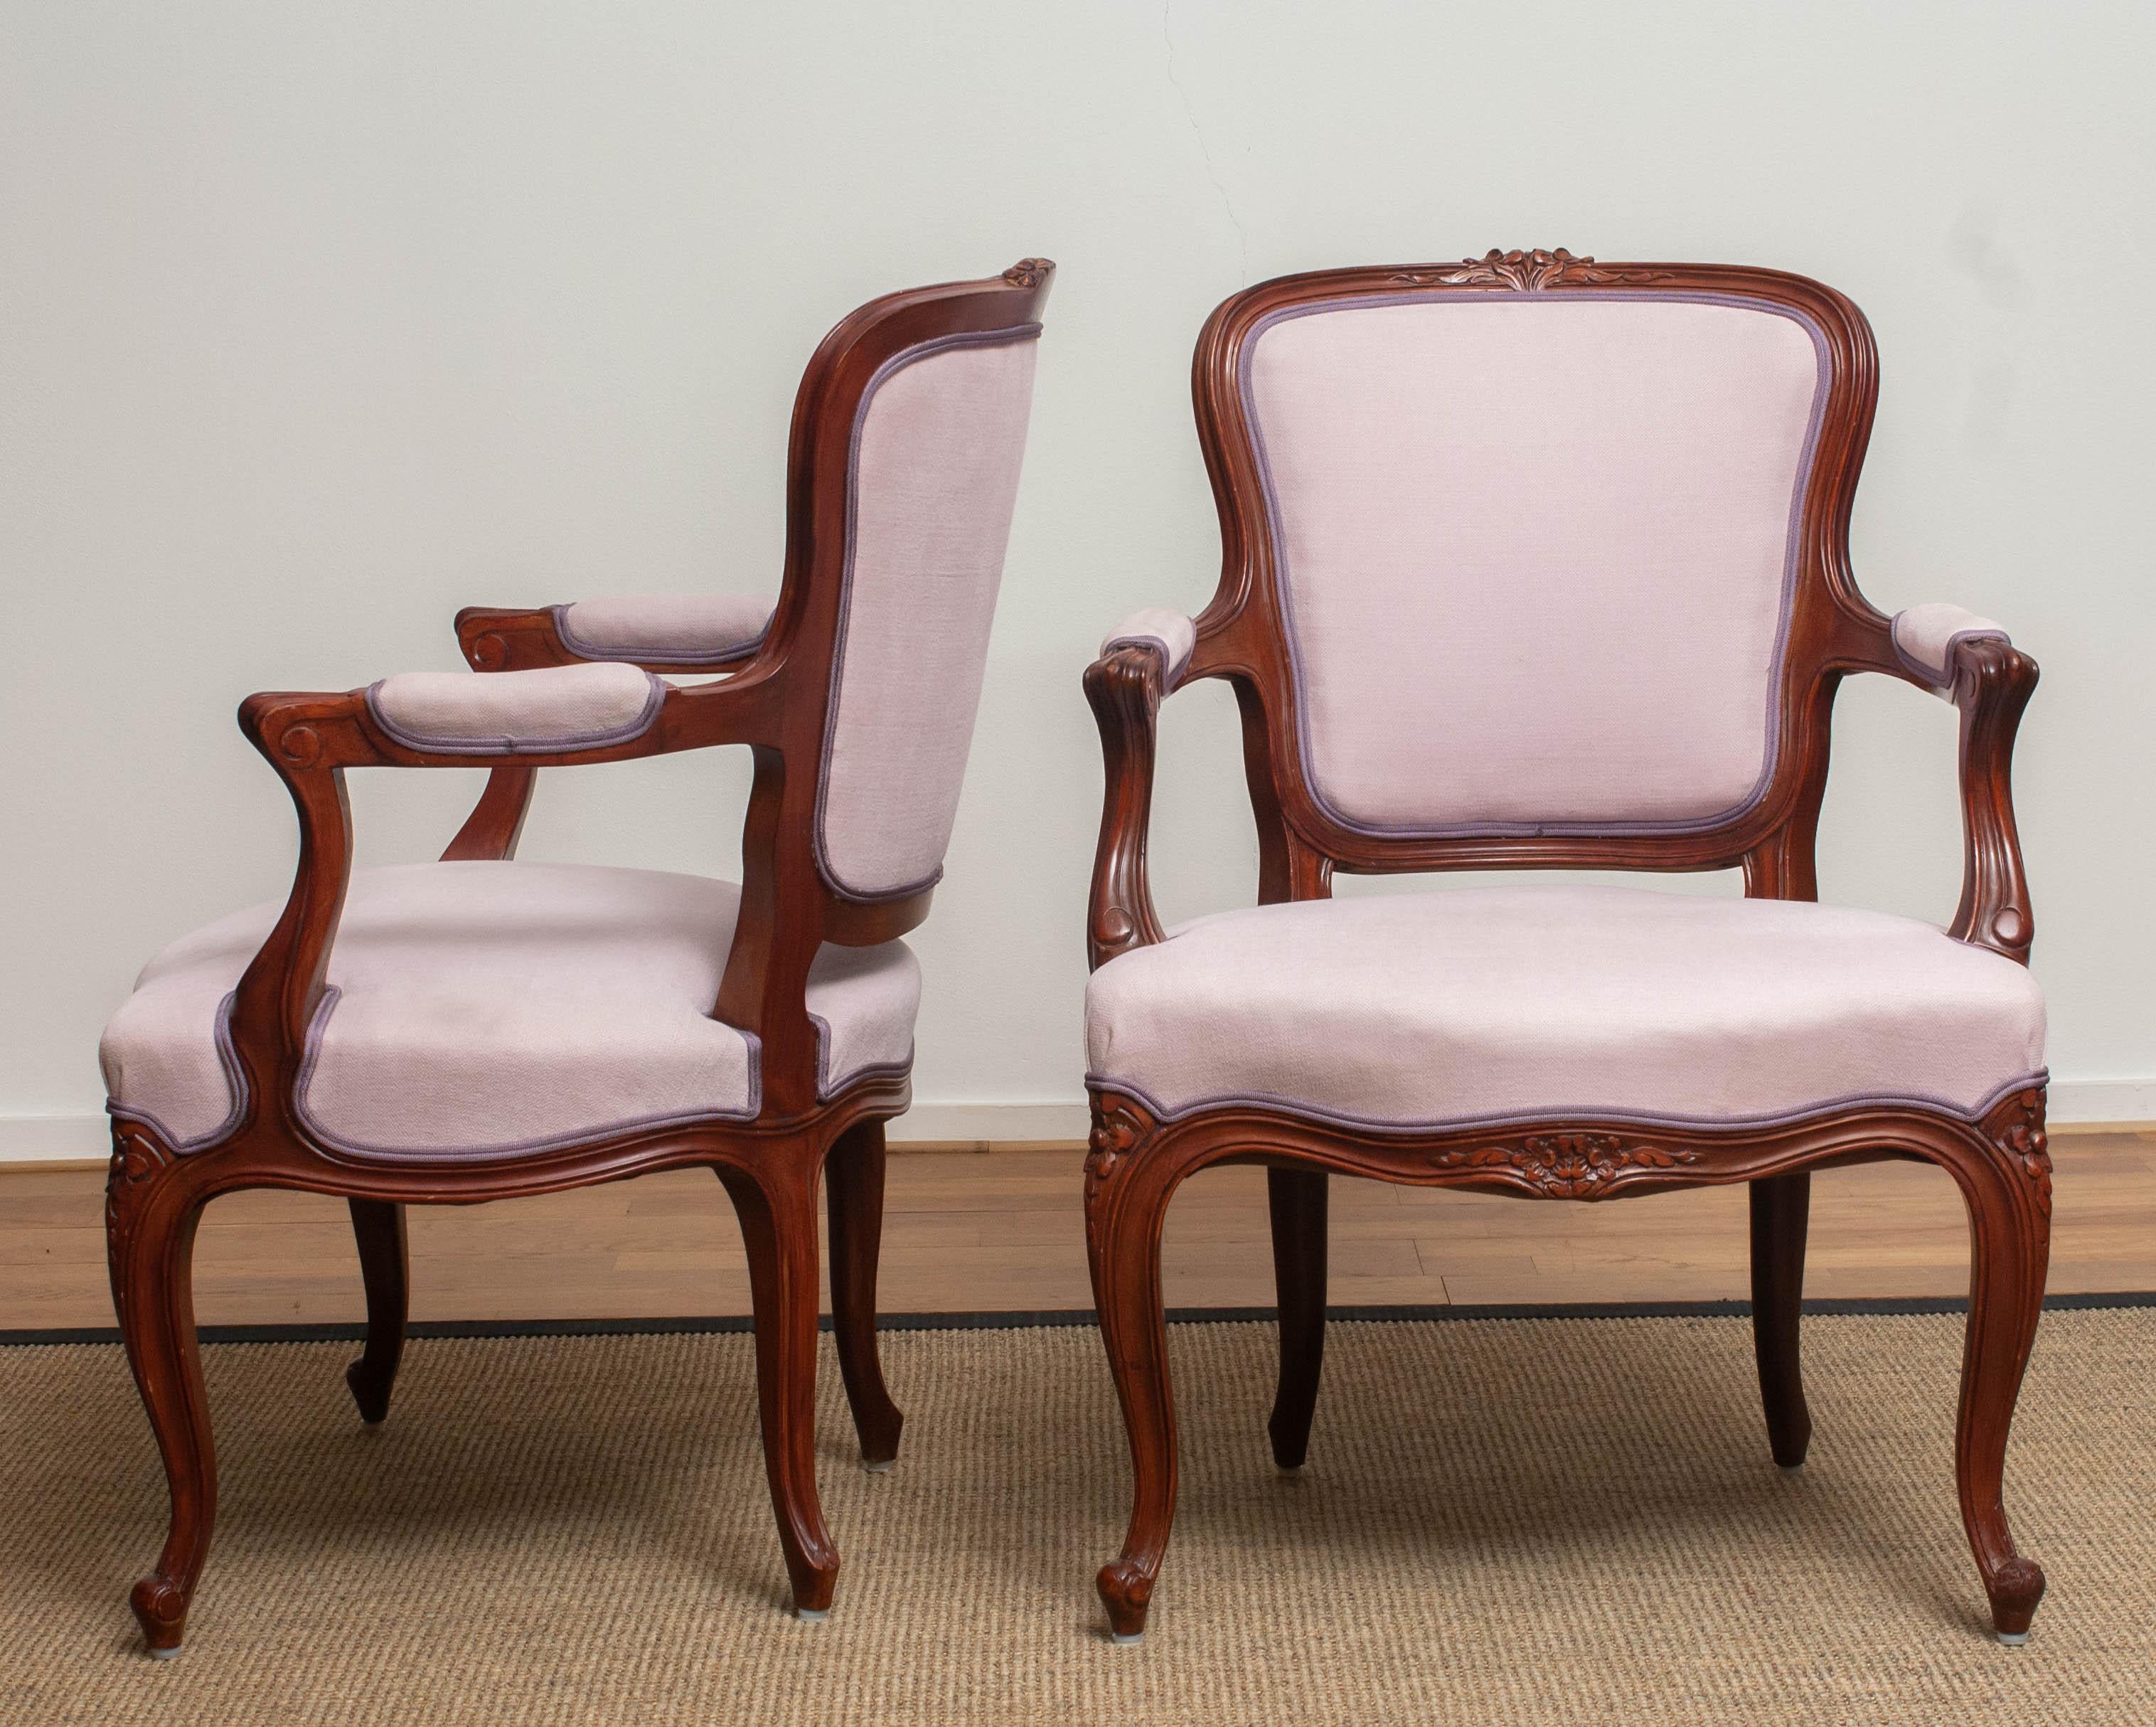 1950s Pair of Pink Swedish Rococo Bergères in the Shabby Chic Technique Chairs F In Good Condition In Silvolde, Gelderland